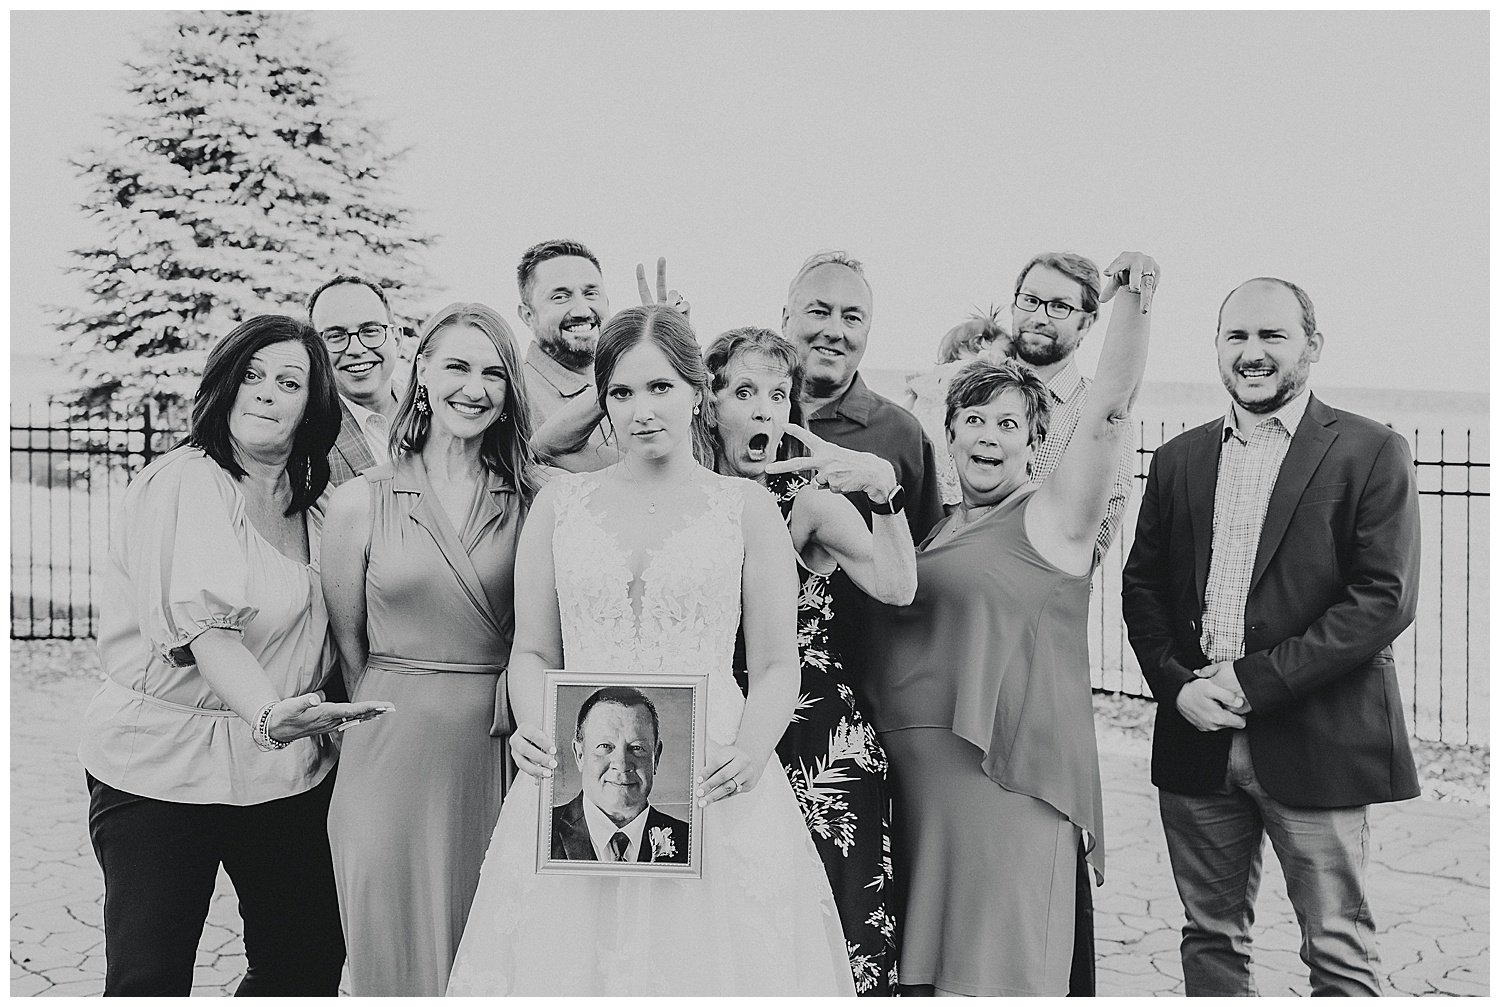  Okay, this is such a fun tradition that I haven’t heard of before! The groom’s mom’s side of the family does an “Outlaw Photo” at every wedding. It’s all of the people who have married into their family. I love that they still made sure to include C